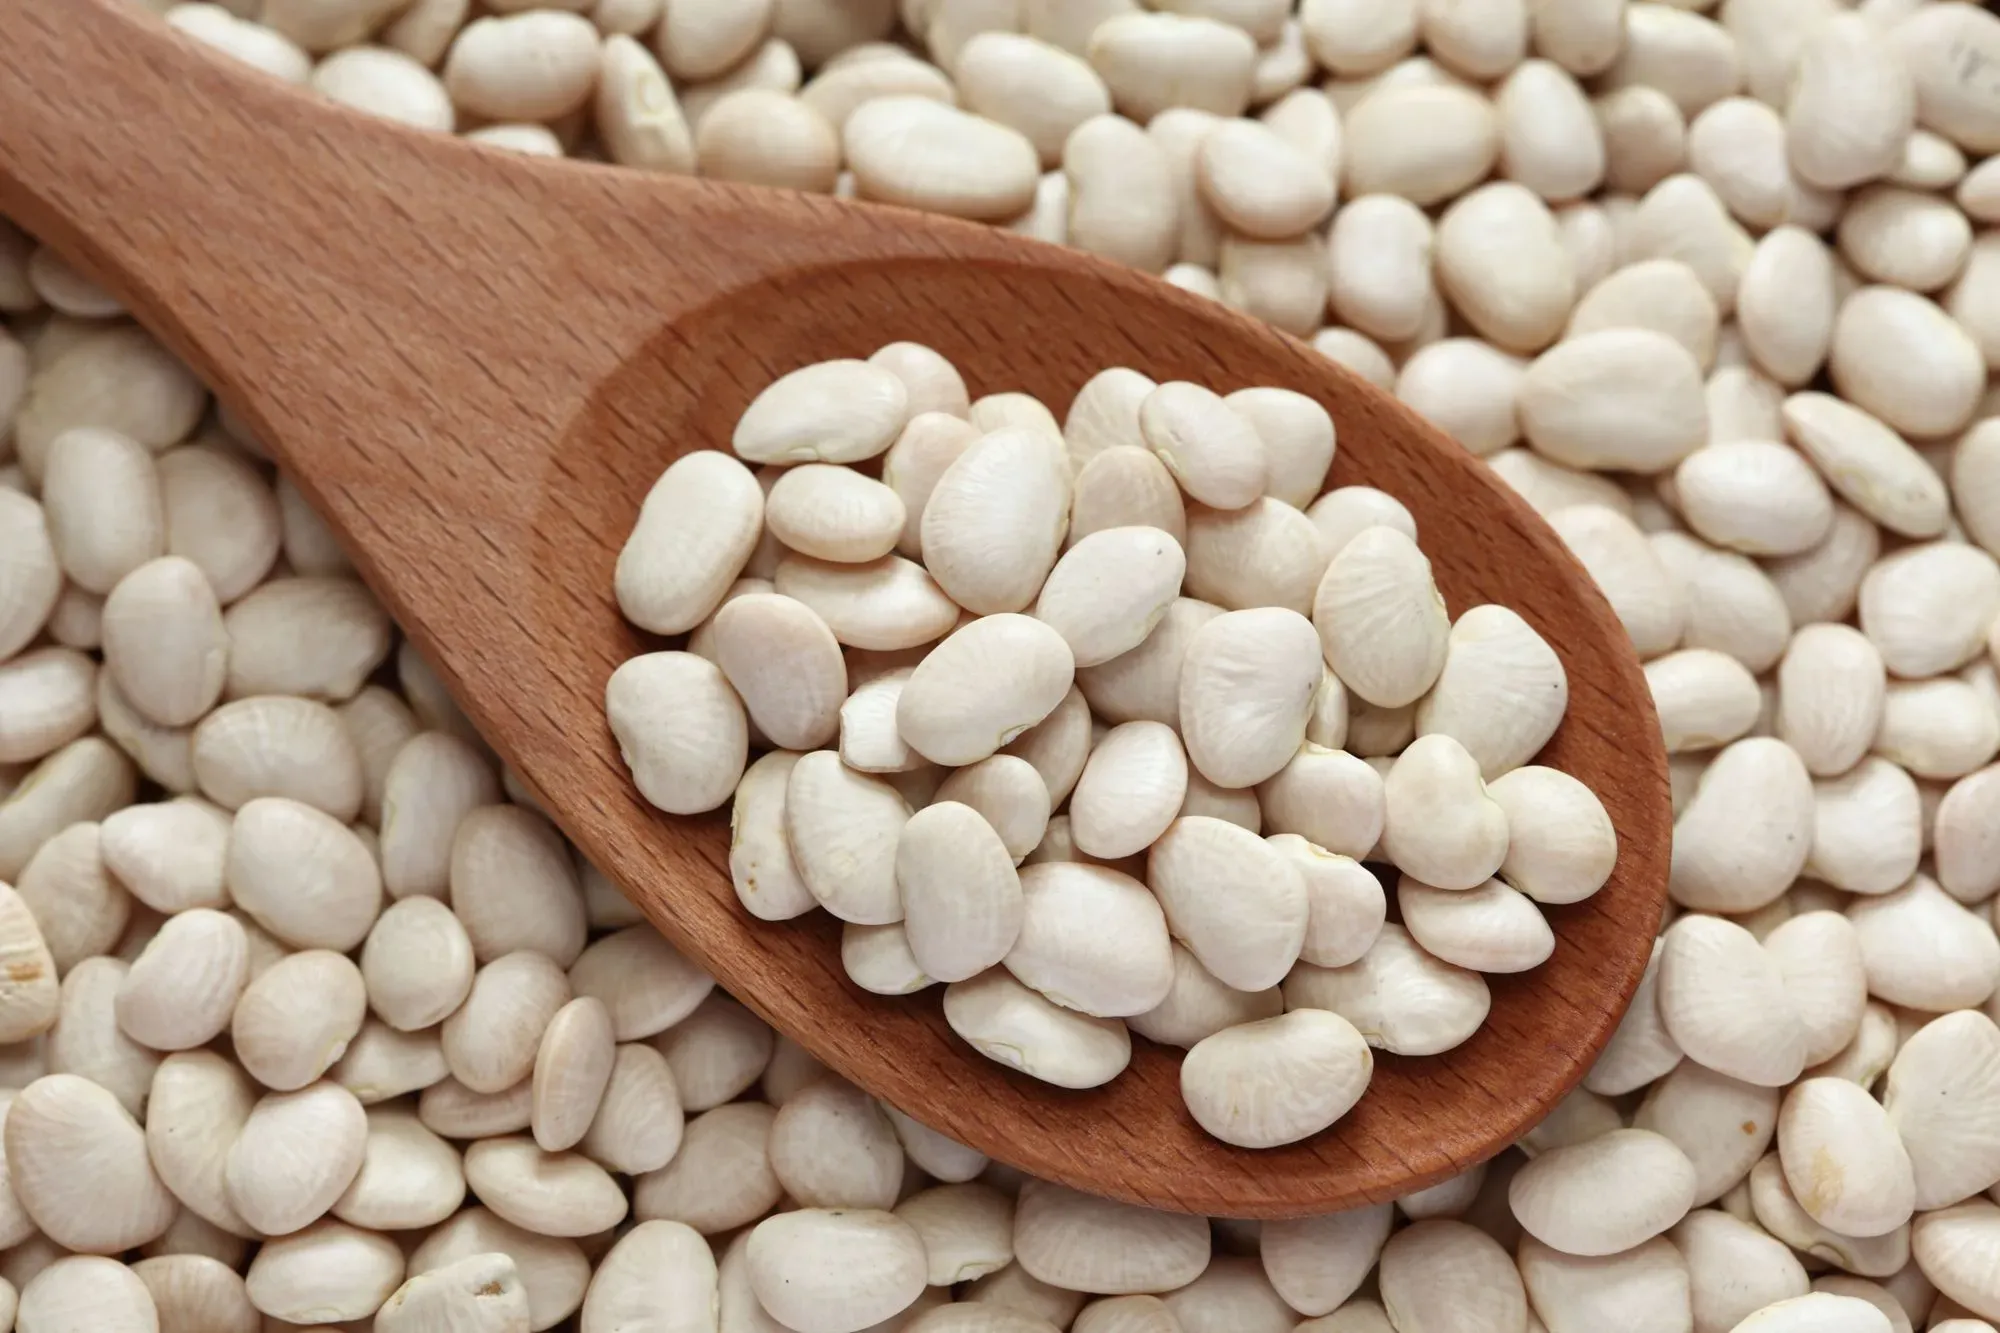 One lima bean fact is that these beans are also known as butter beans.